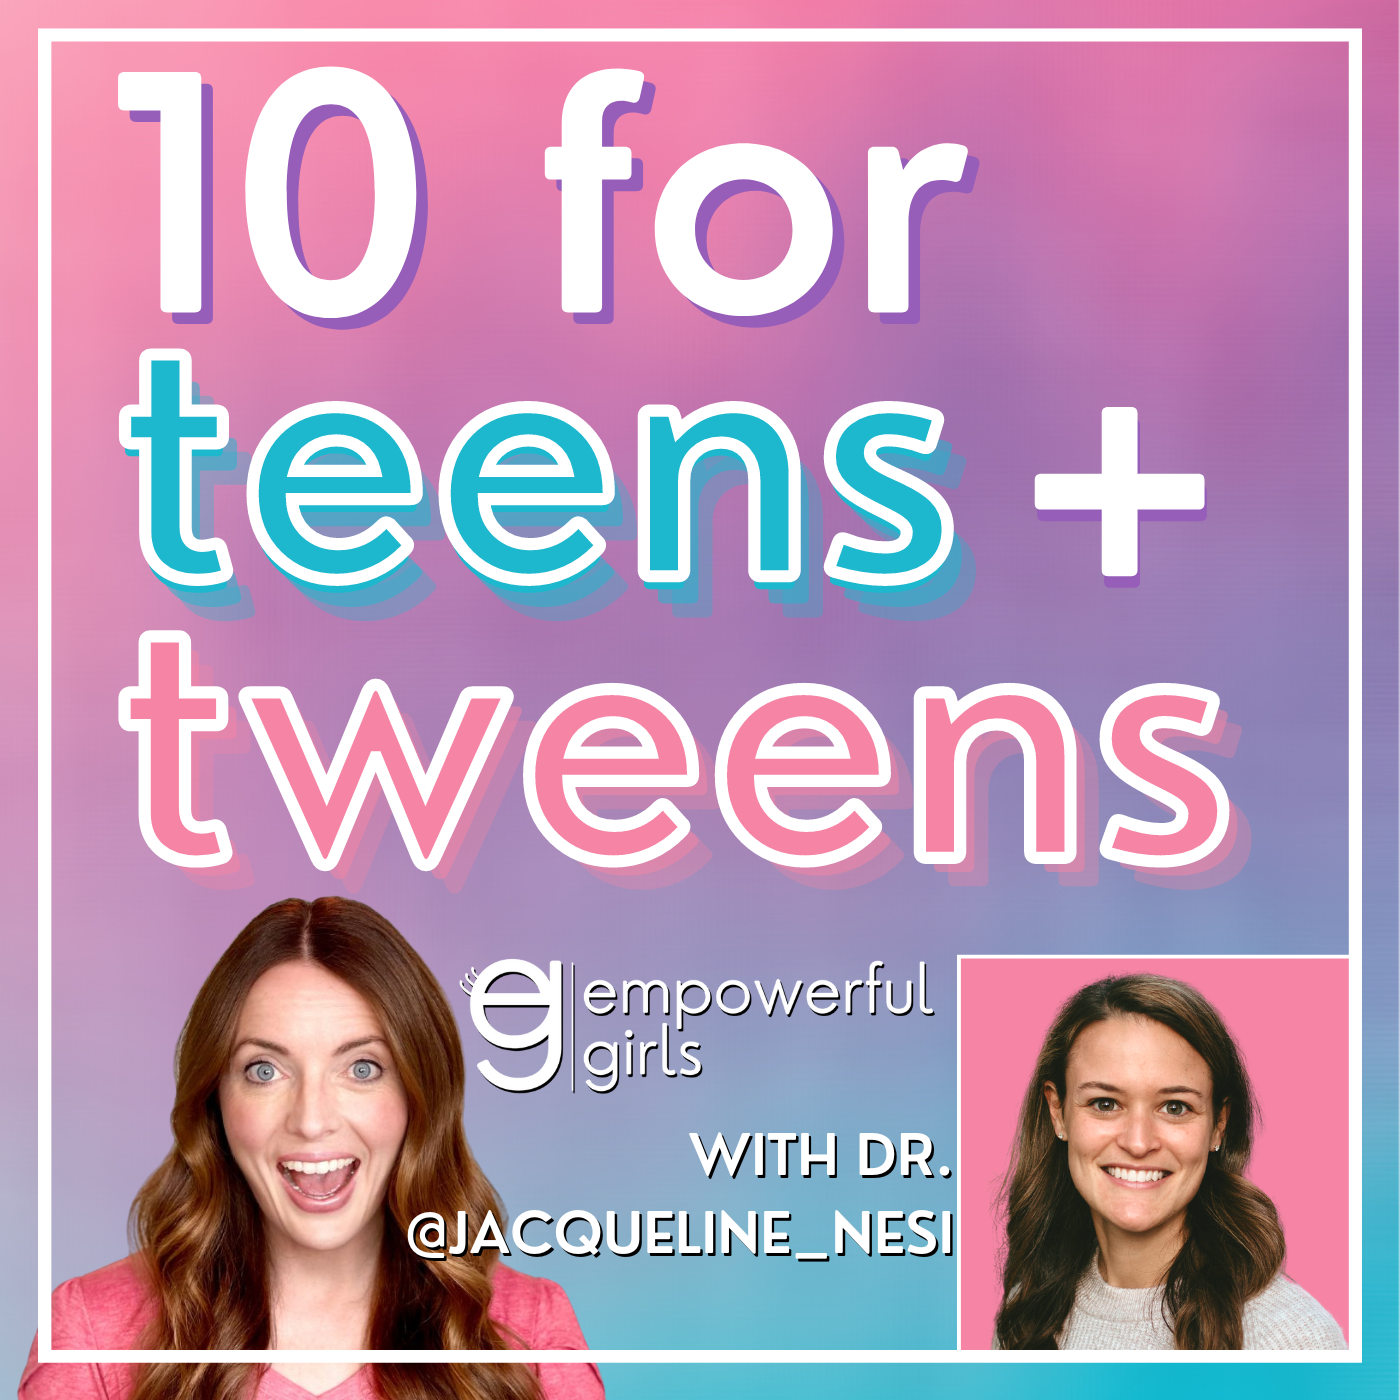 I interview Dr. Jacqueline Nesi, a psychologist and expert on how social media impacts teens and tweens.